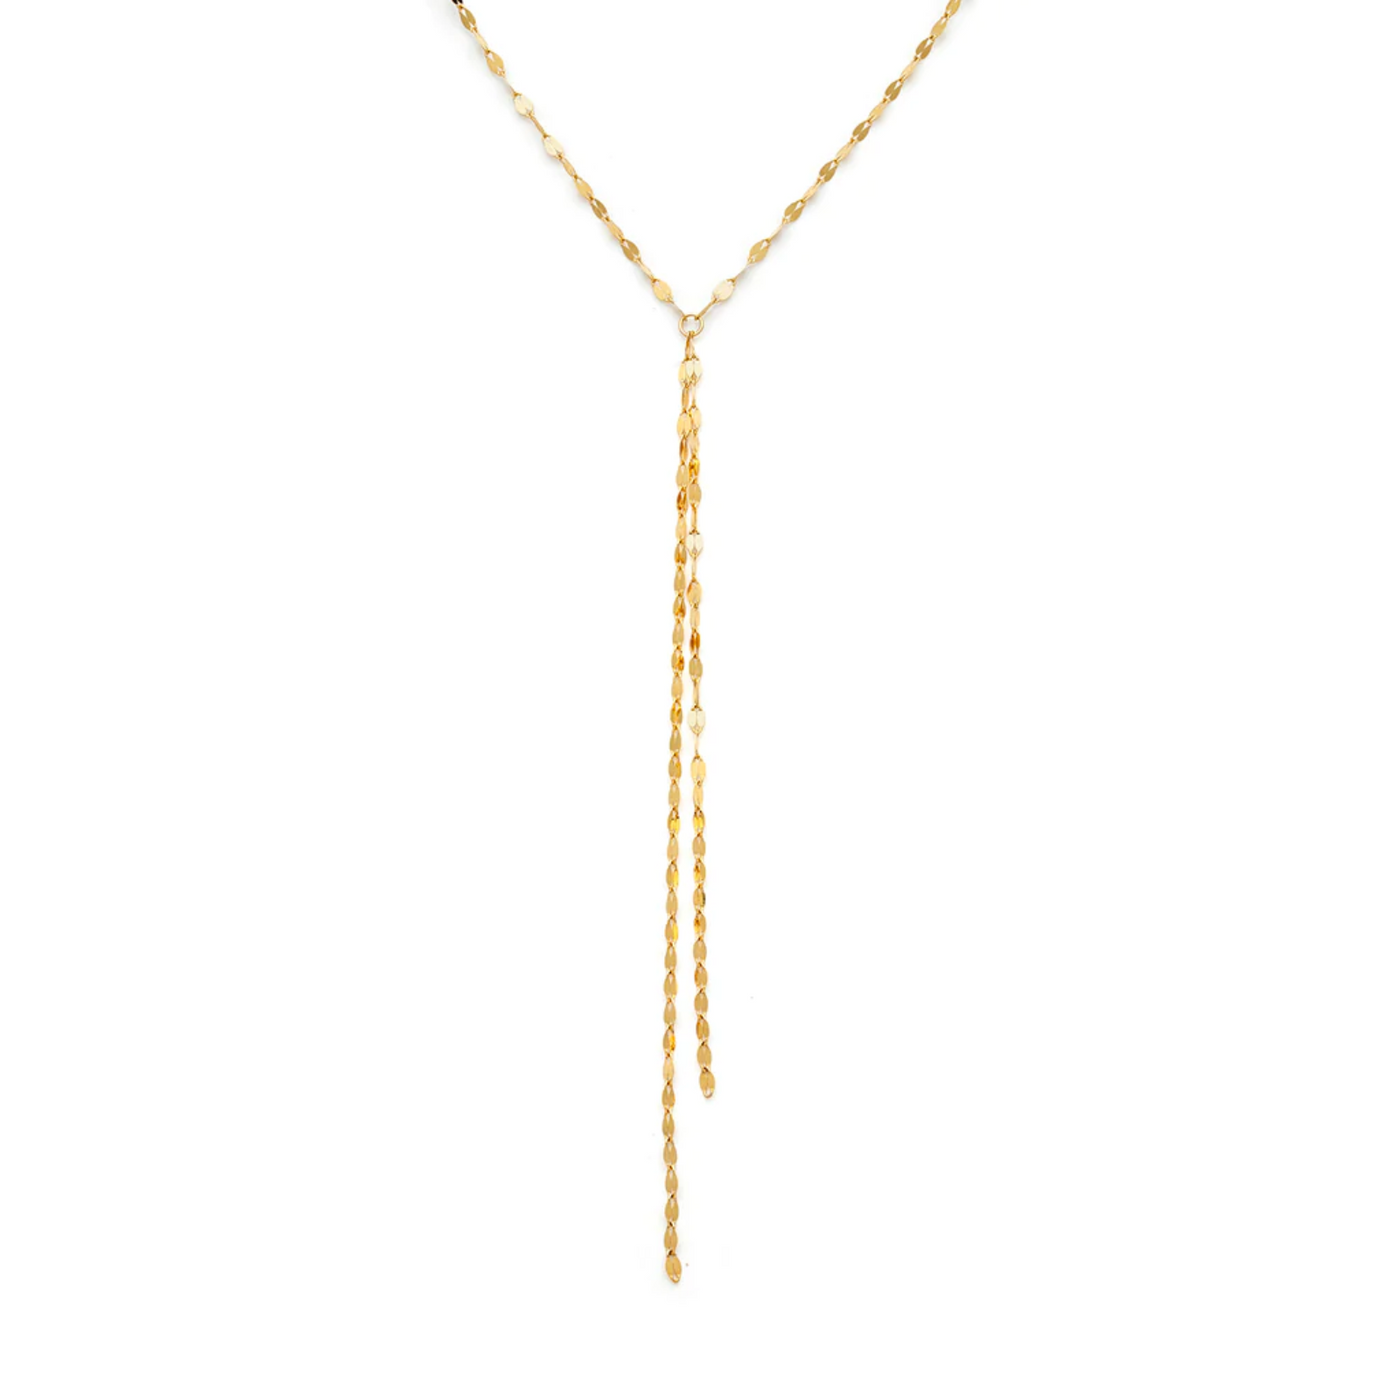 Leah Alexandra Shimmer Lariat Necklace